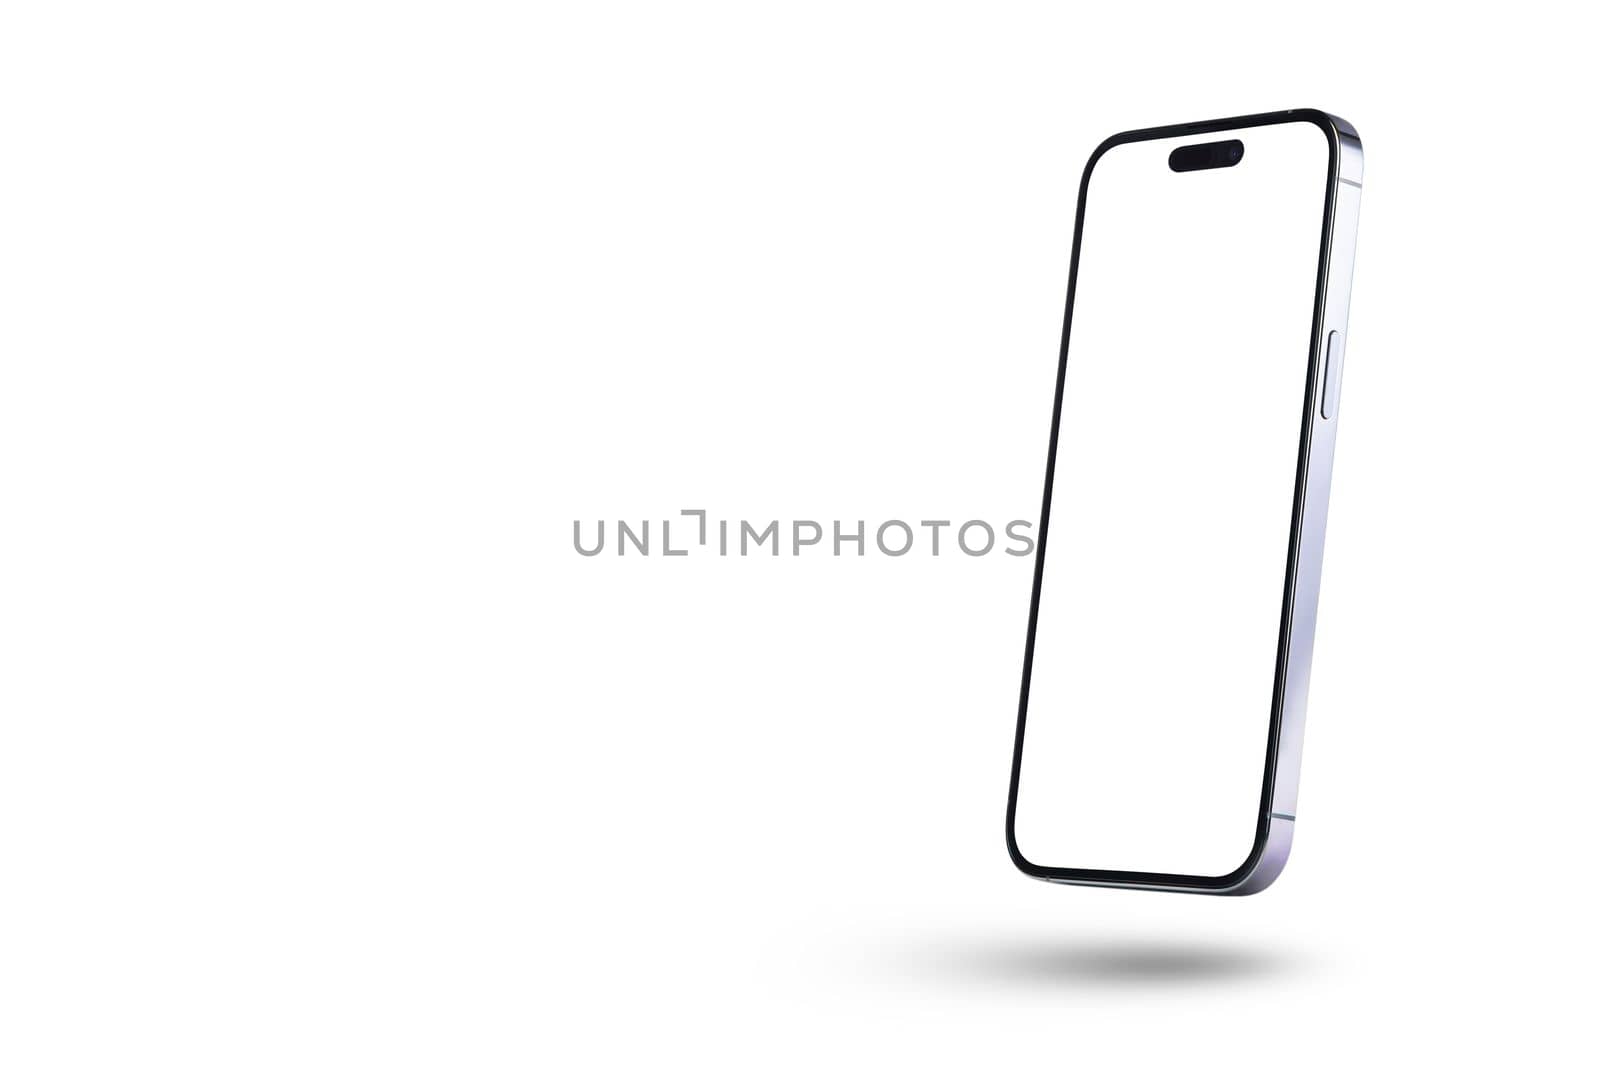 Isolate the phone with a white screen to insert into the project. The new mobile phone is isolated on a white background drops, casting a shadow